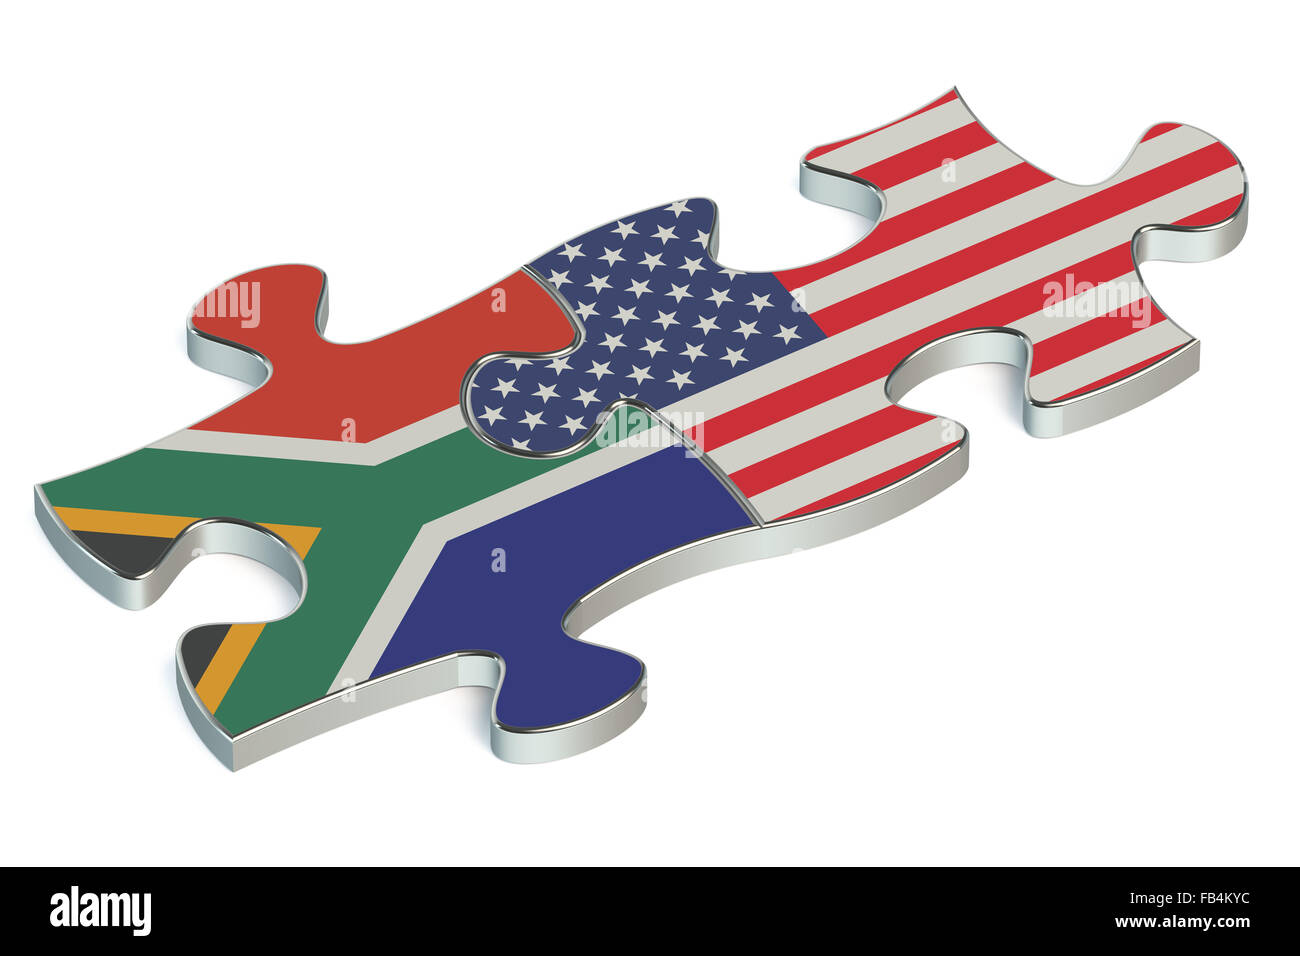 USA and South Africa puzzles from flags Stock Photo